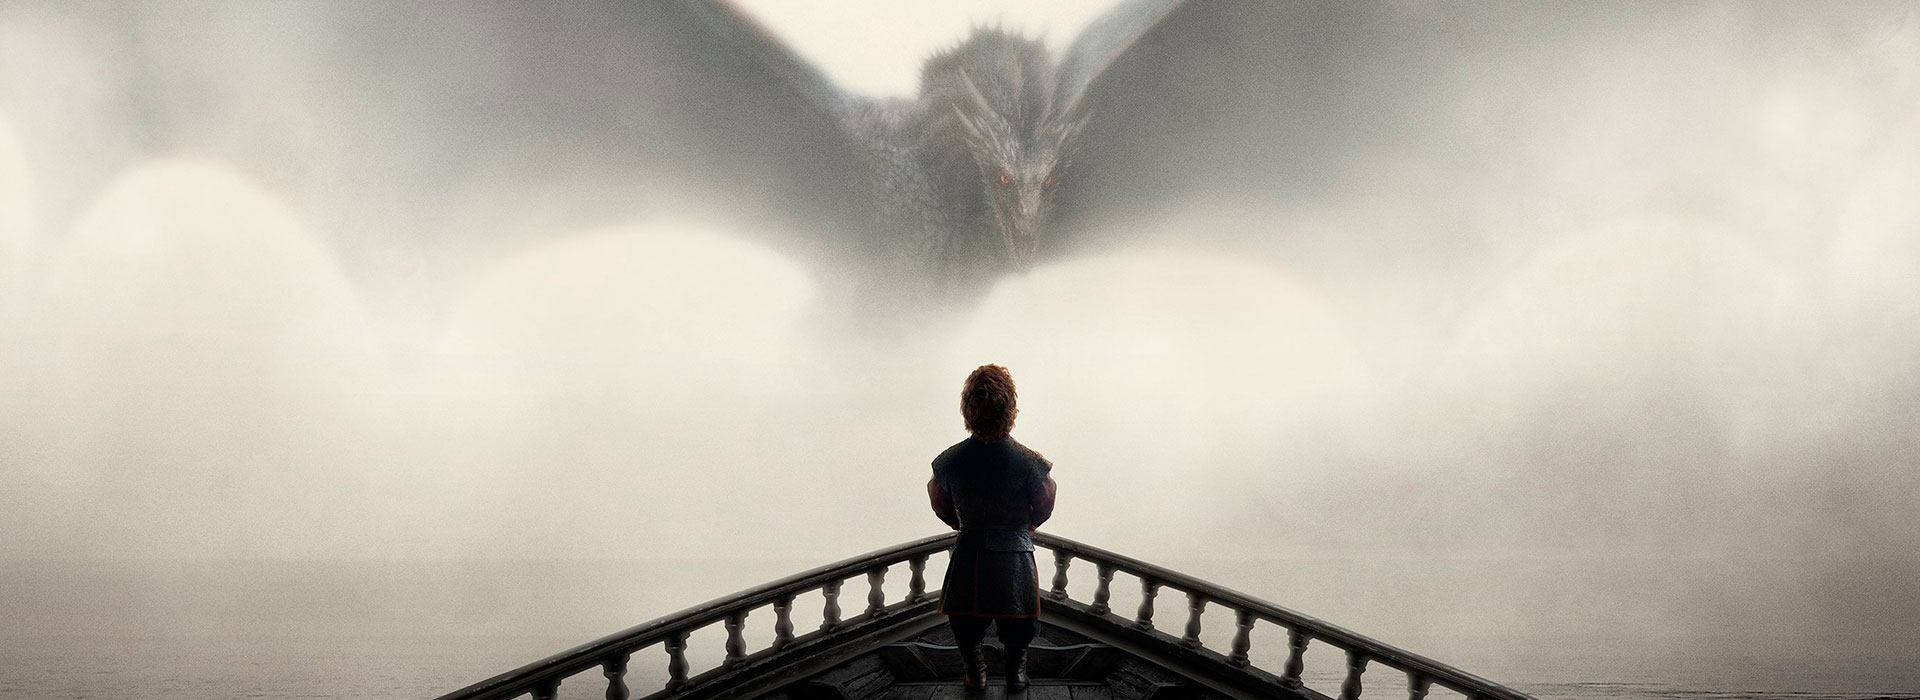 Game Of Thrones Season 8 Tyrion Dragon Picture